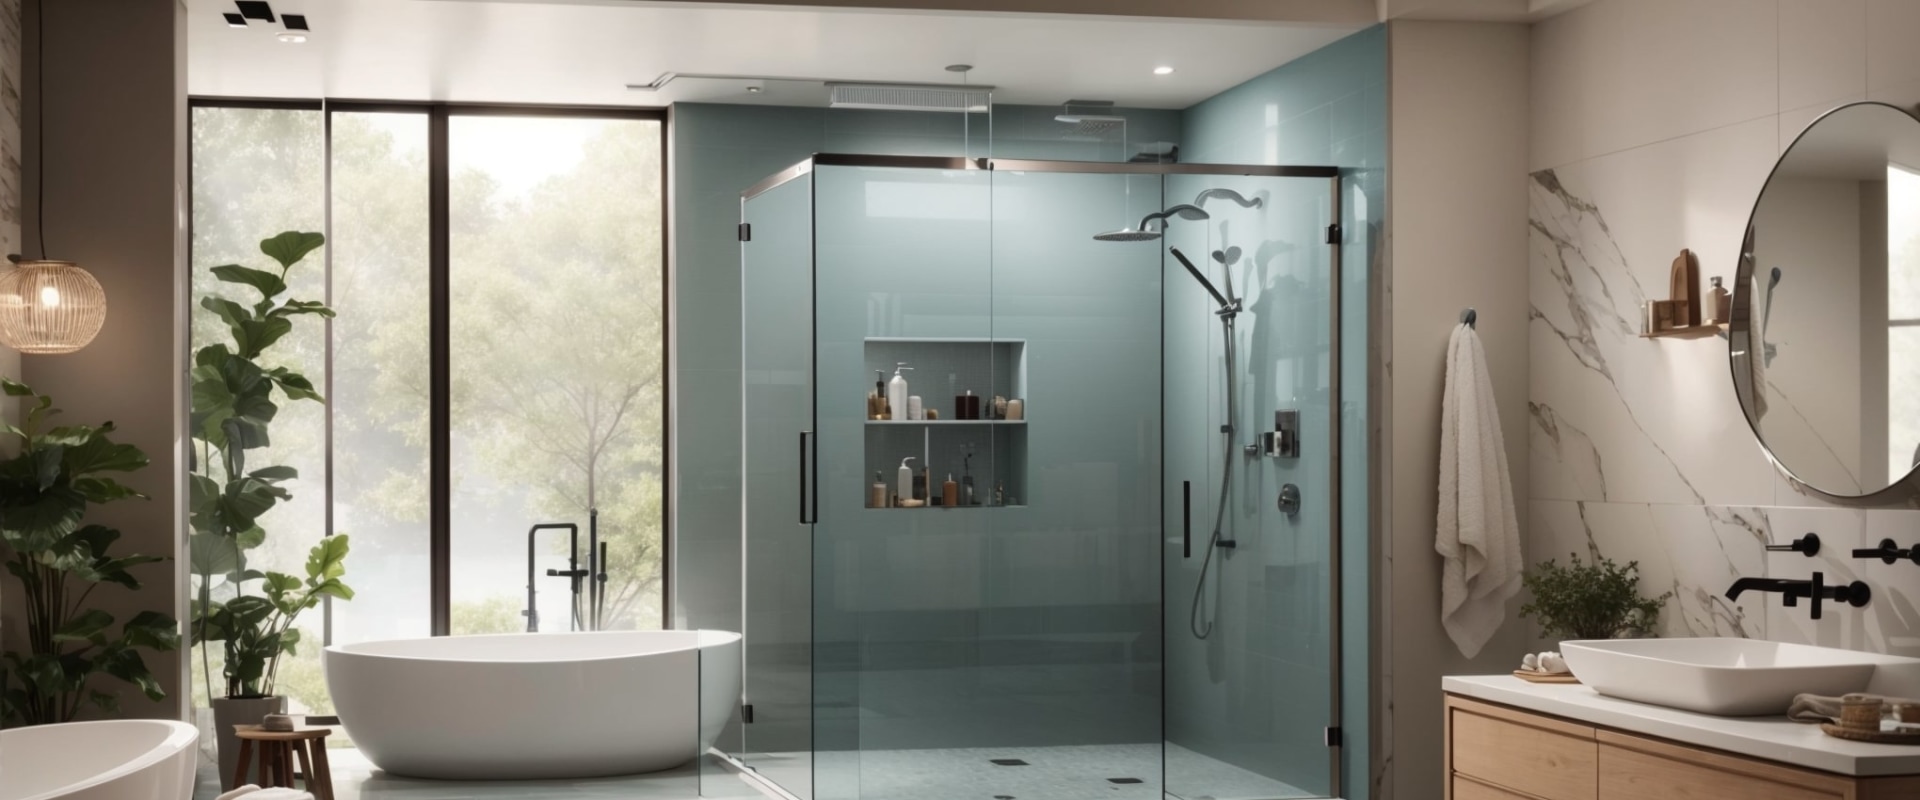 Installing a Walk-In Shower or Bathtub: Transform Your Bathroom with These Tips